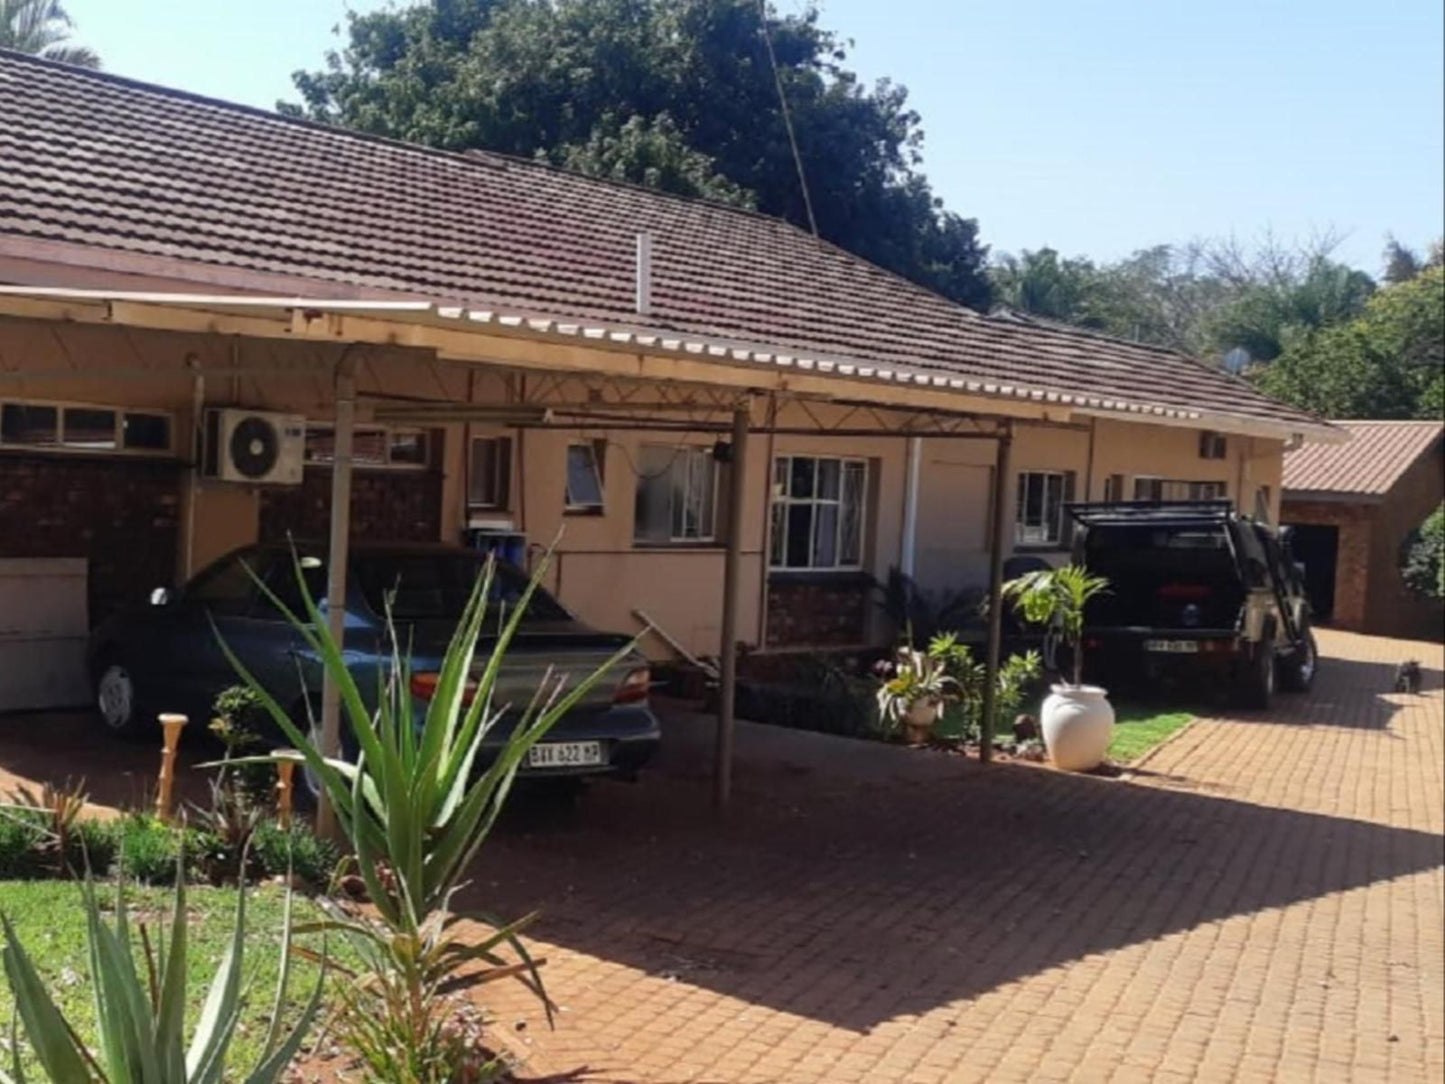 Mansie Bed And Breakfast Malelane Mpumalanga South Africa House, Building, Architecture